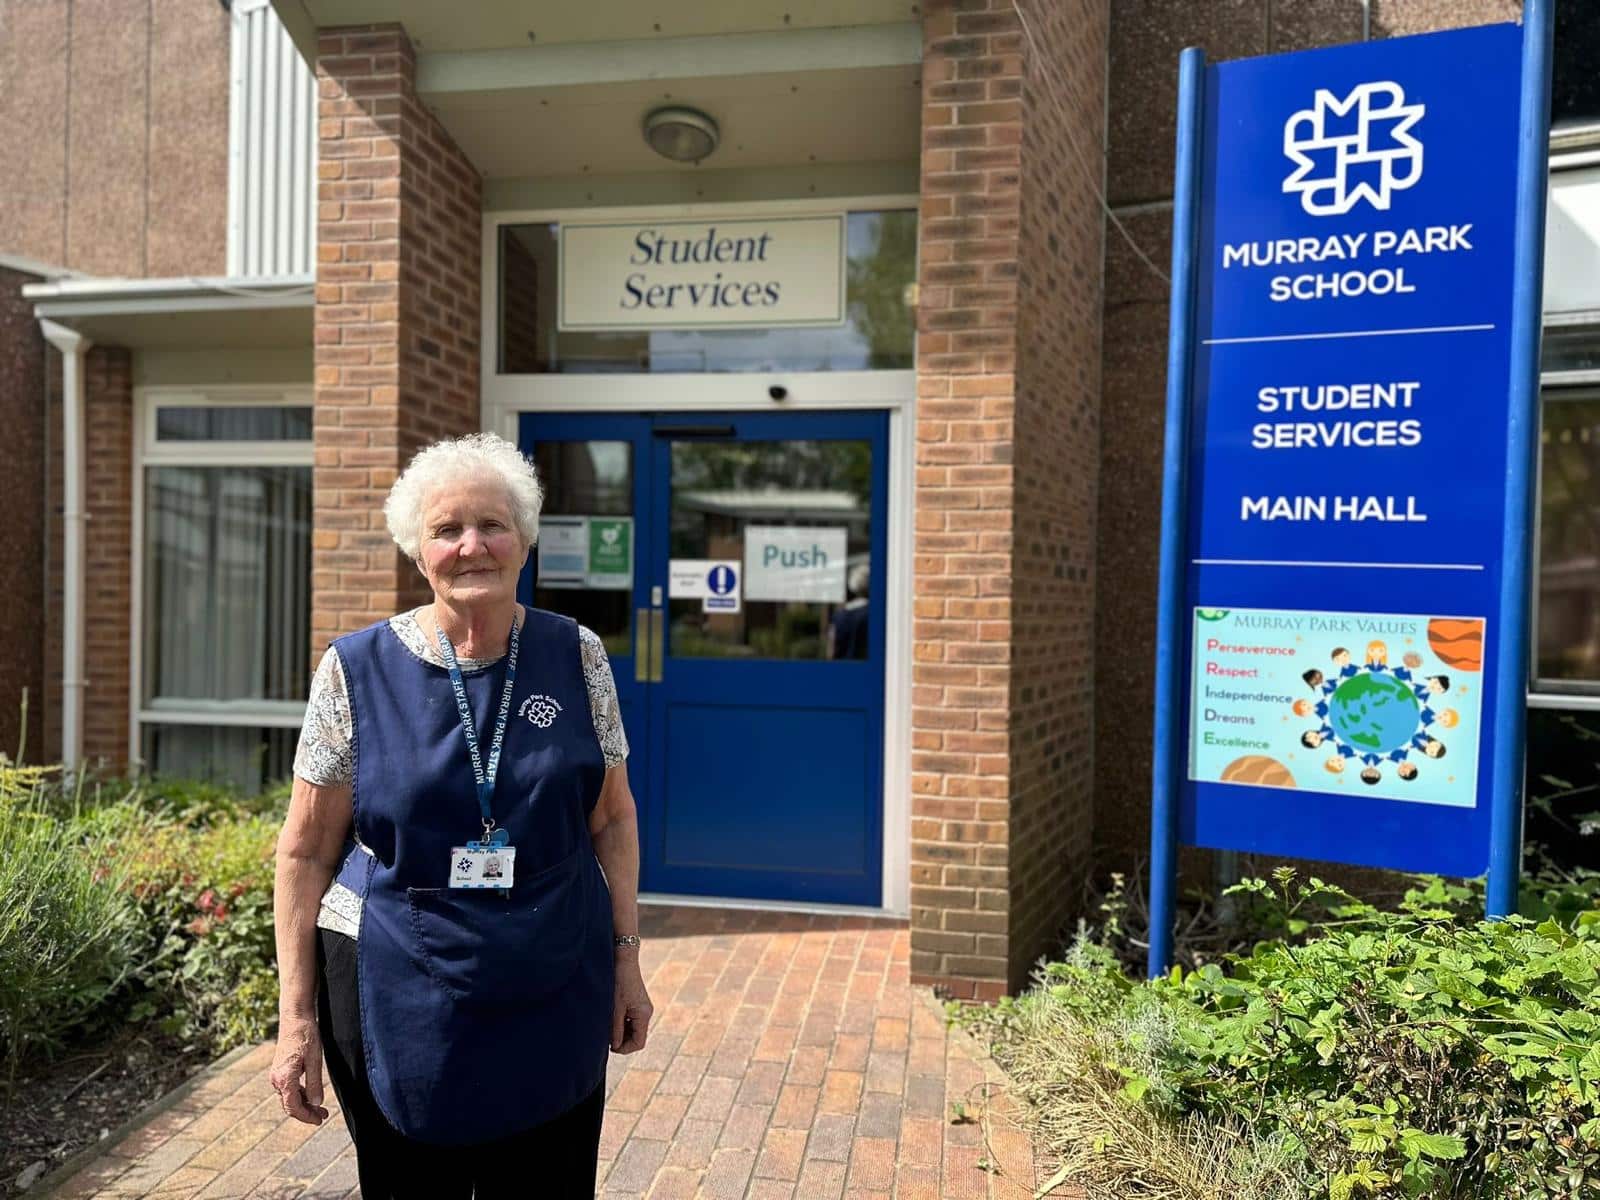 Cleaner Mary Irwin finally retires from Murray Park School aged 81